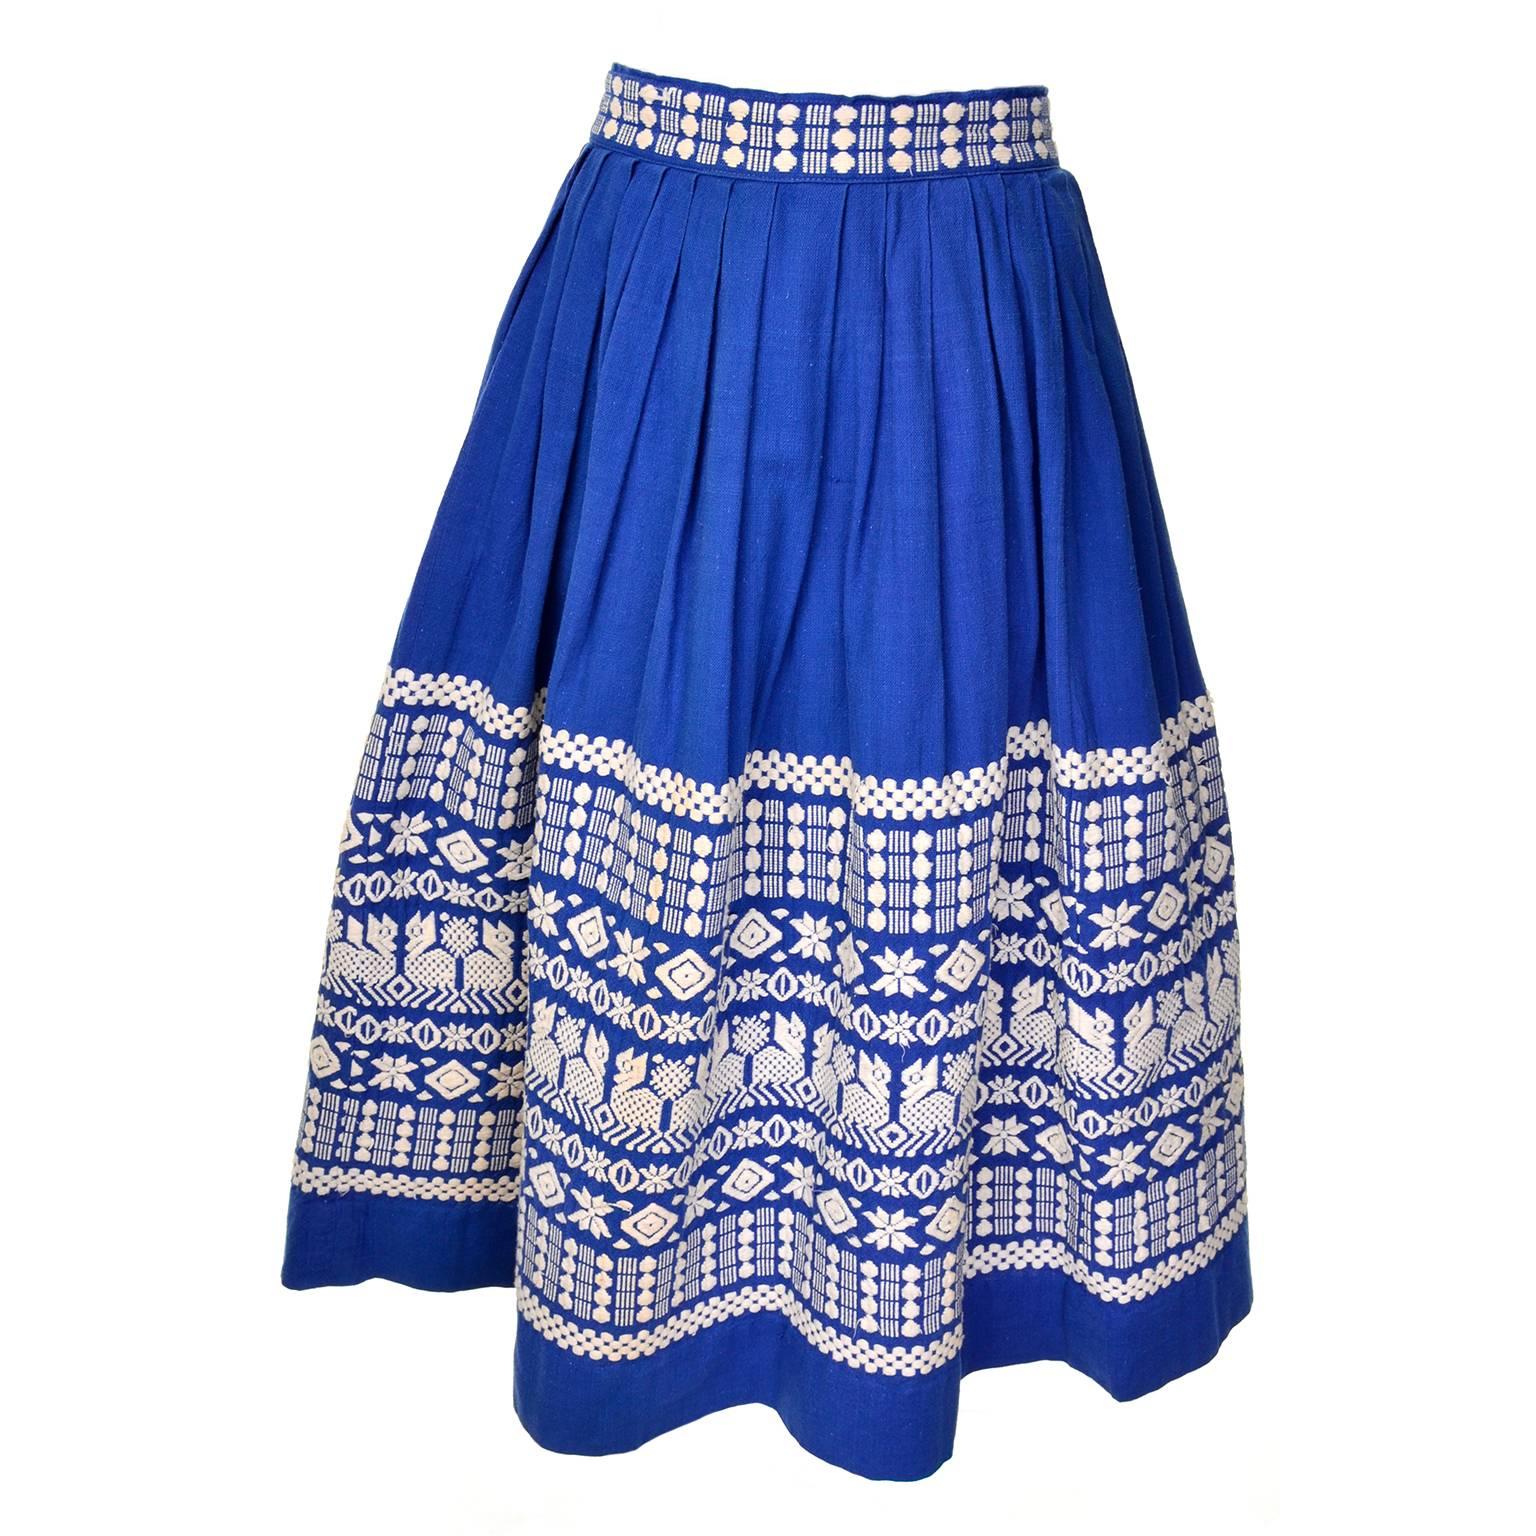 1950s Pelux Guatemala Vintage Folk Blue Skirt Handwoven with White Embroidery